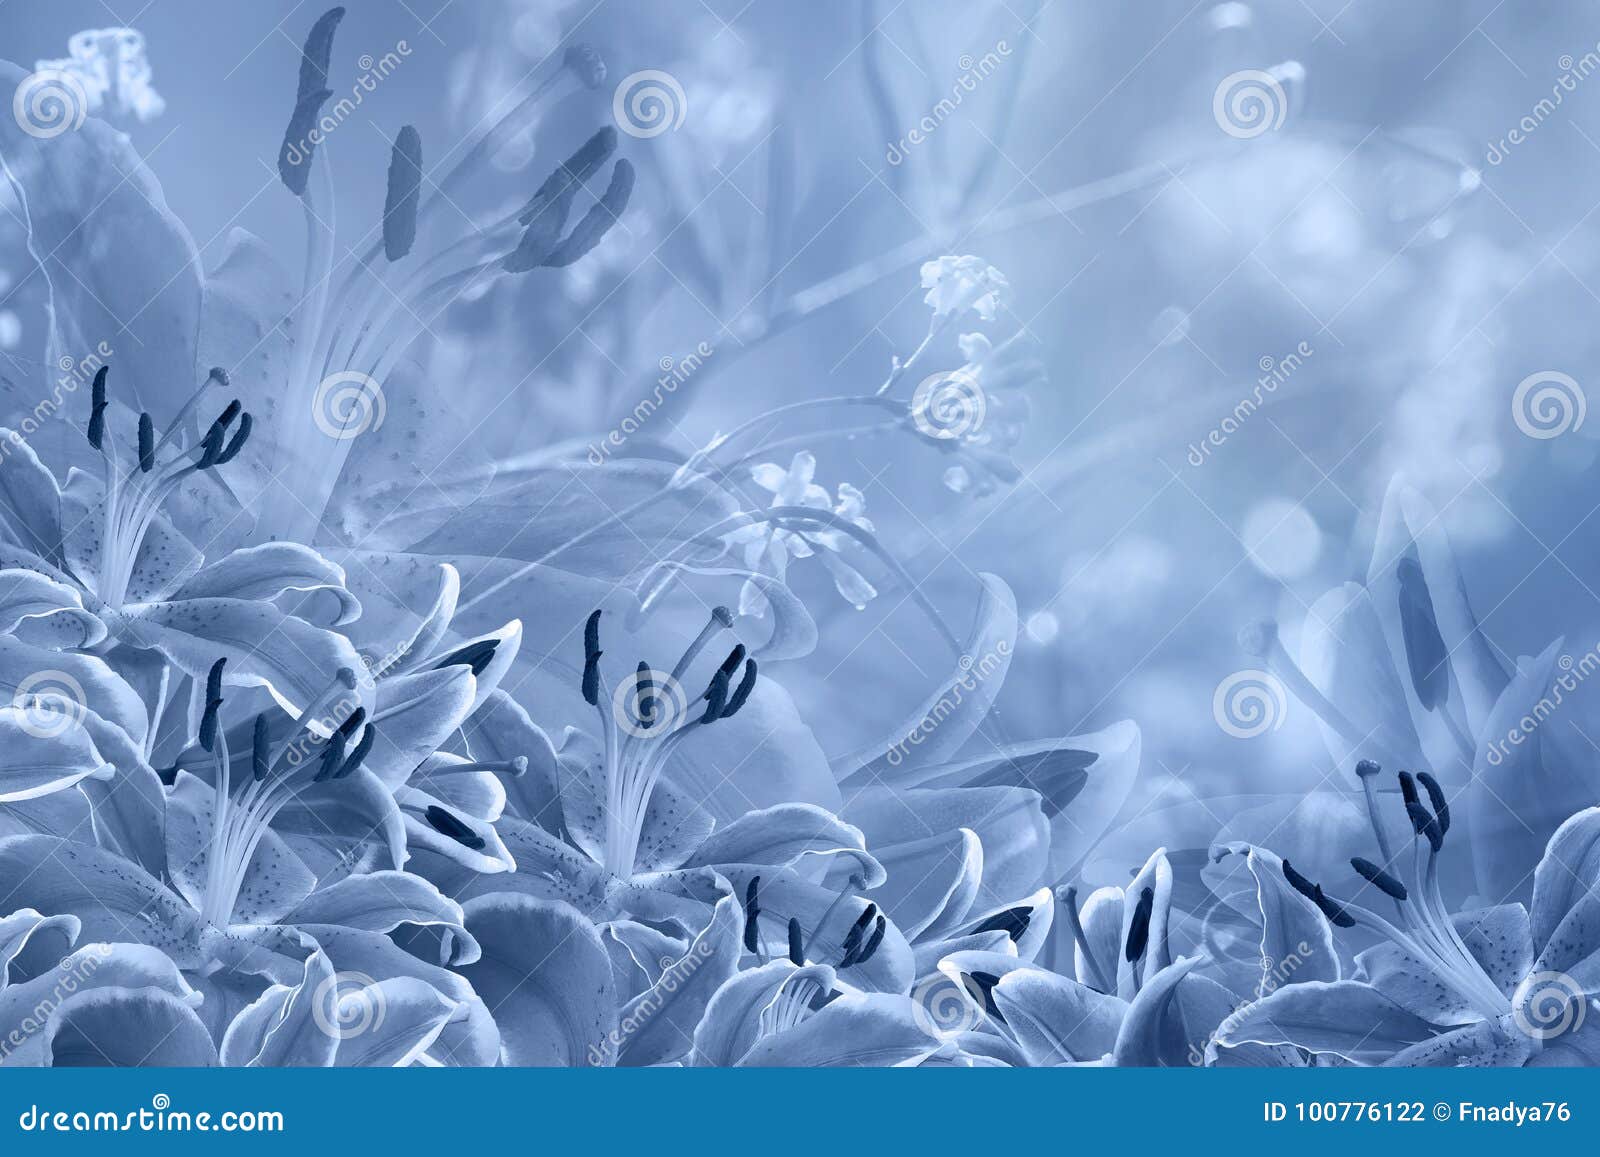 Floral Light Blue Beautiful Background Flower Composition Of Blue Flowers Lilies Stock Photo Image Of Lily Closeup 100776122,How To Paint Ikea Furniture Black